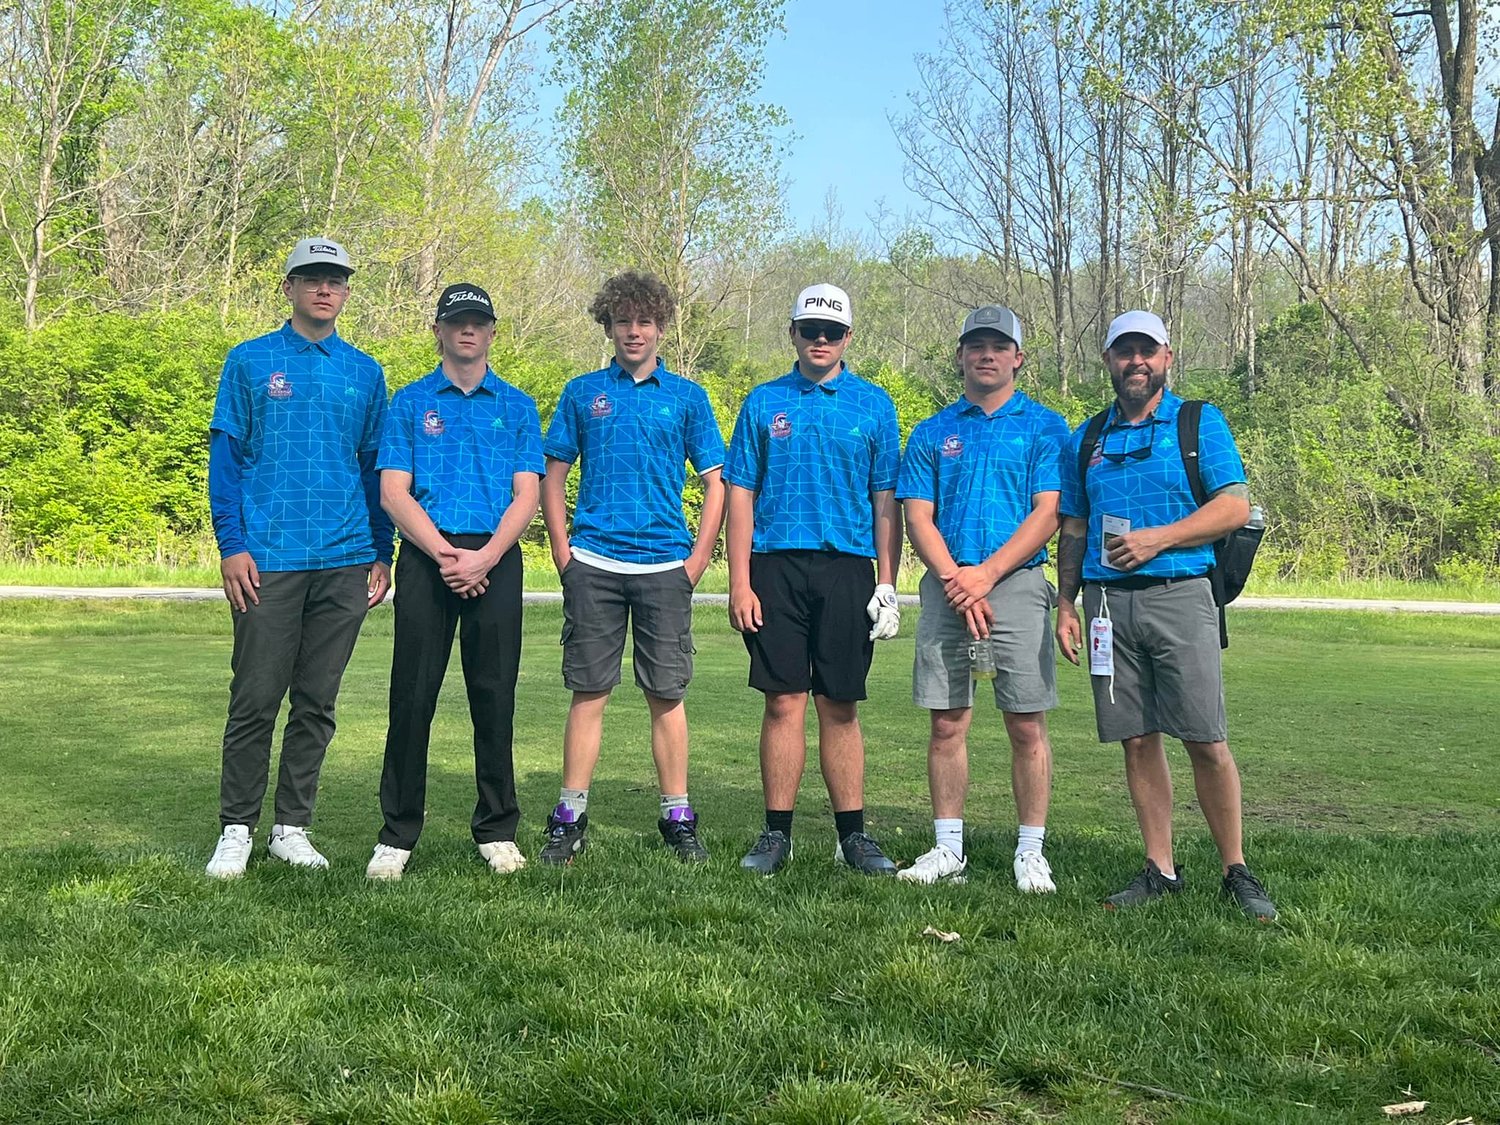 The Moberly High School boys' golf team played Hodge Park Golf Course in Kansas City for the first time ever earlier this week.